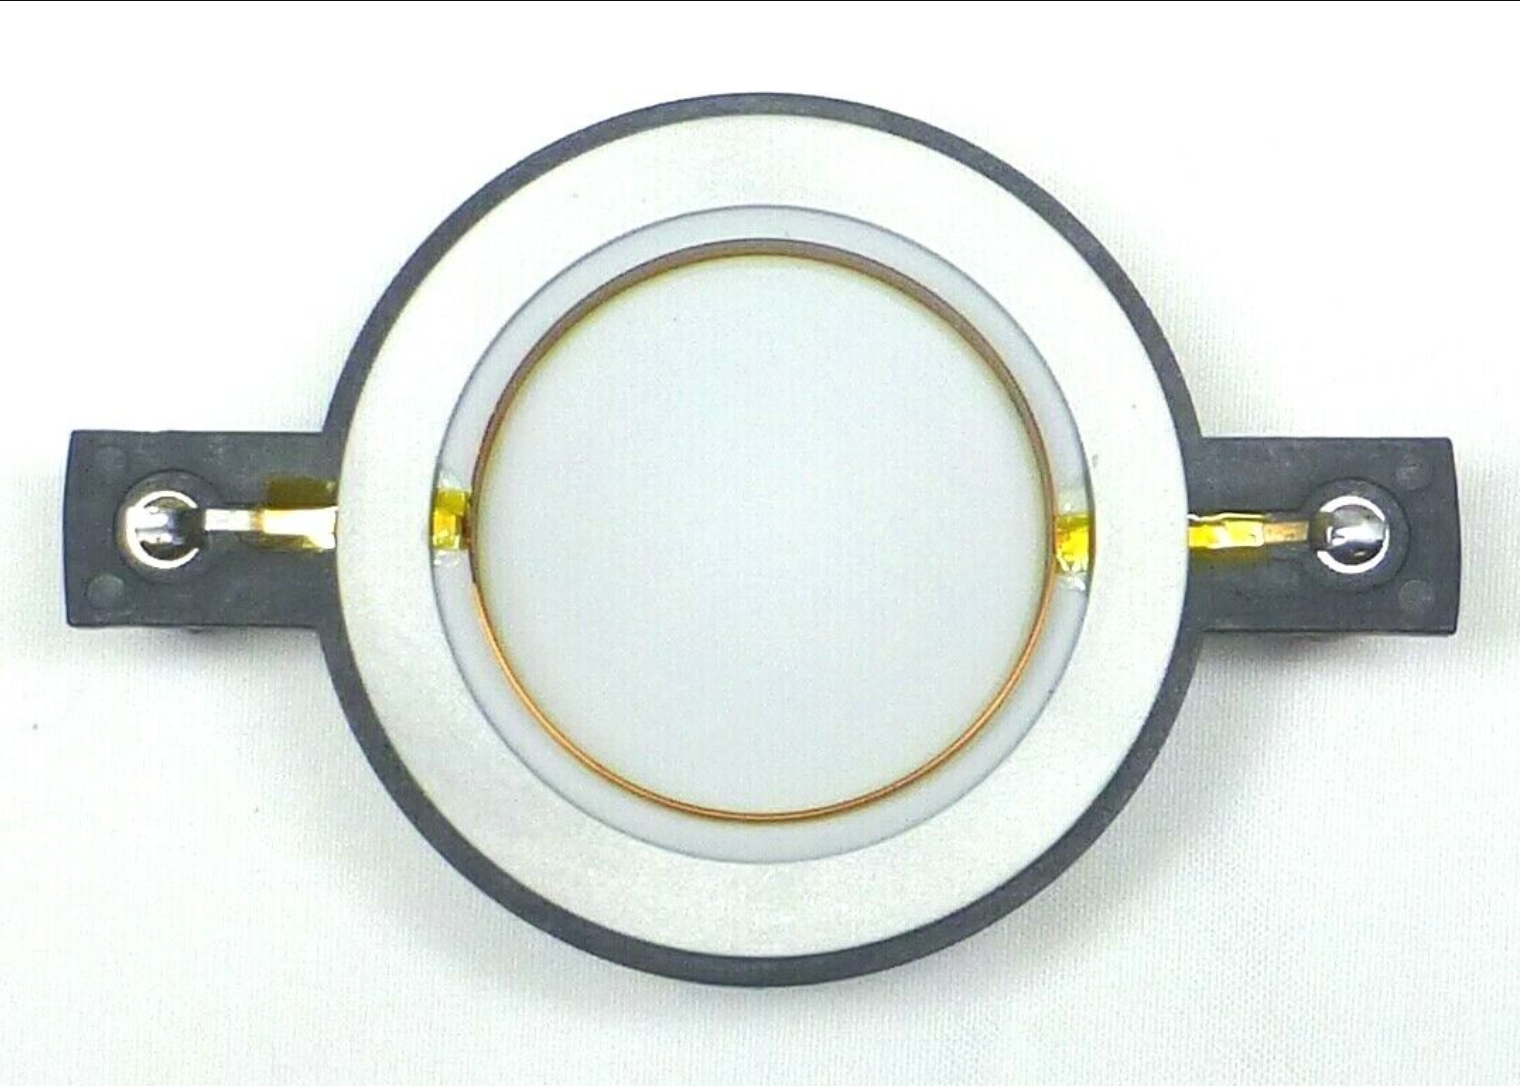 Replacement Diaphragm for B&C DE25-16 Driver, B&C MMD25-16 Hex Push-On 16 ohm